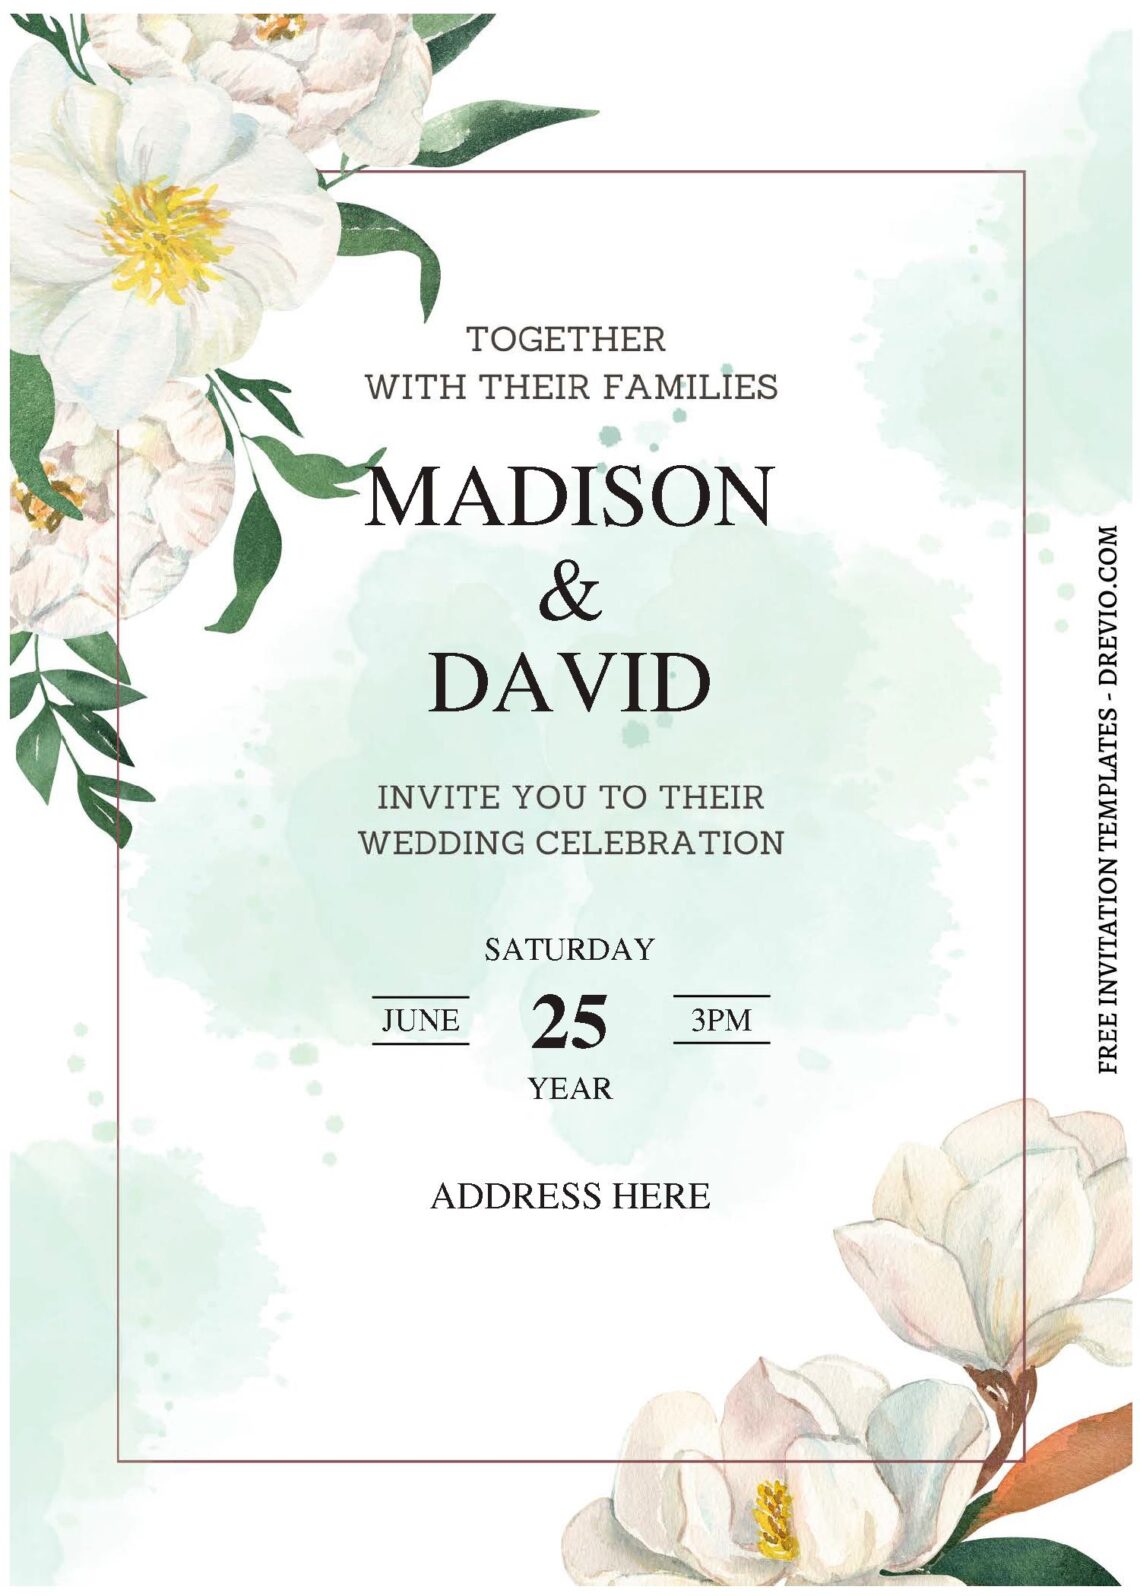 (Free Editable PDF) Dreamy White Floral Wedding Invitation Templates with watercolor background